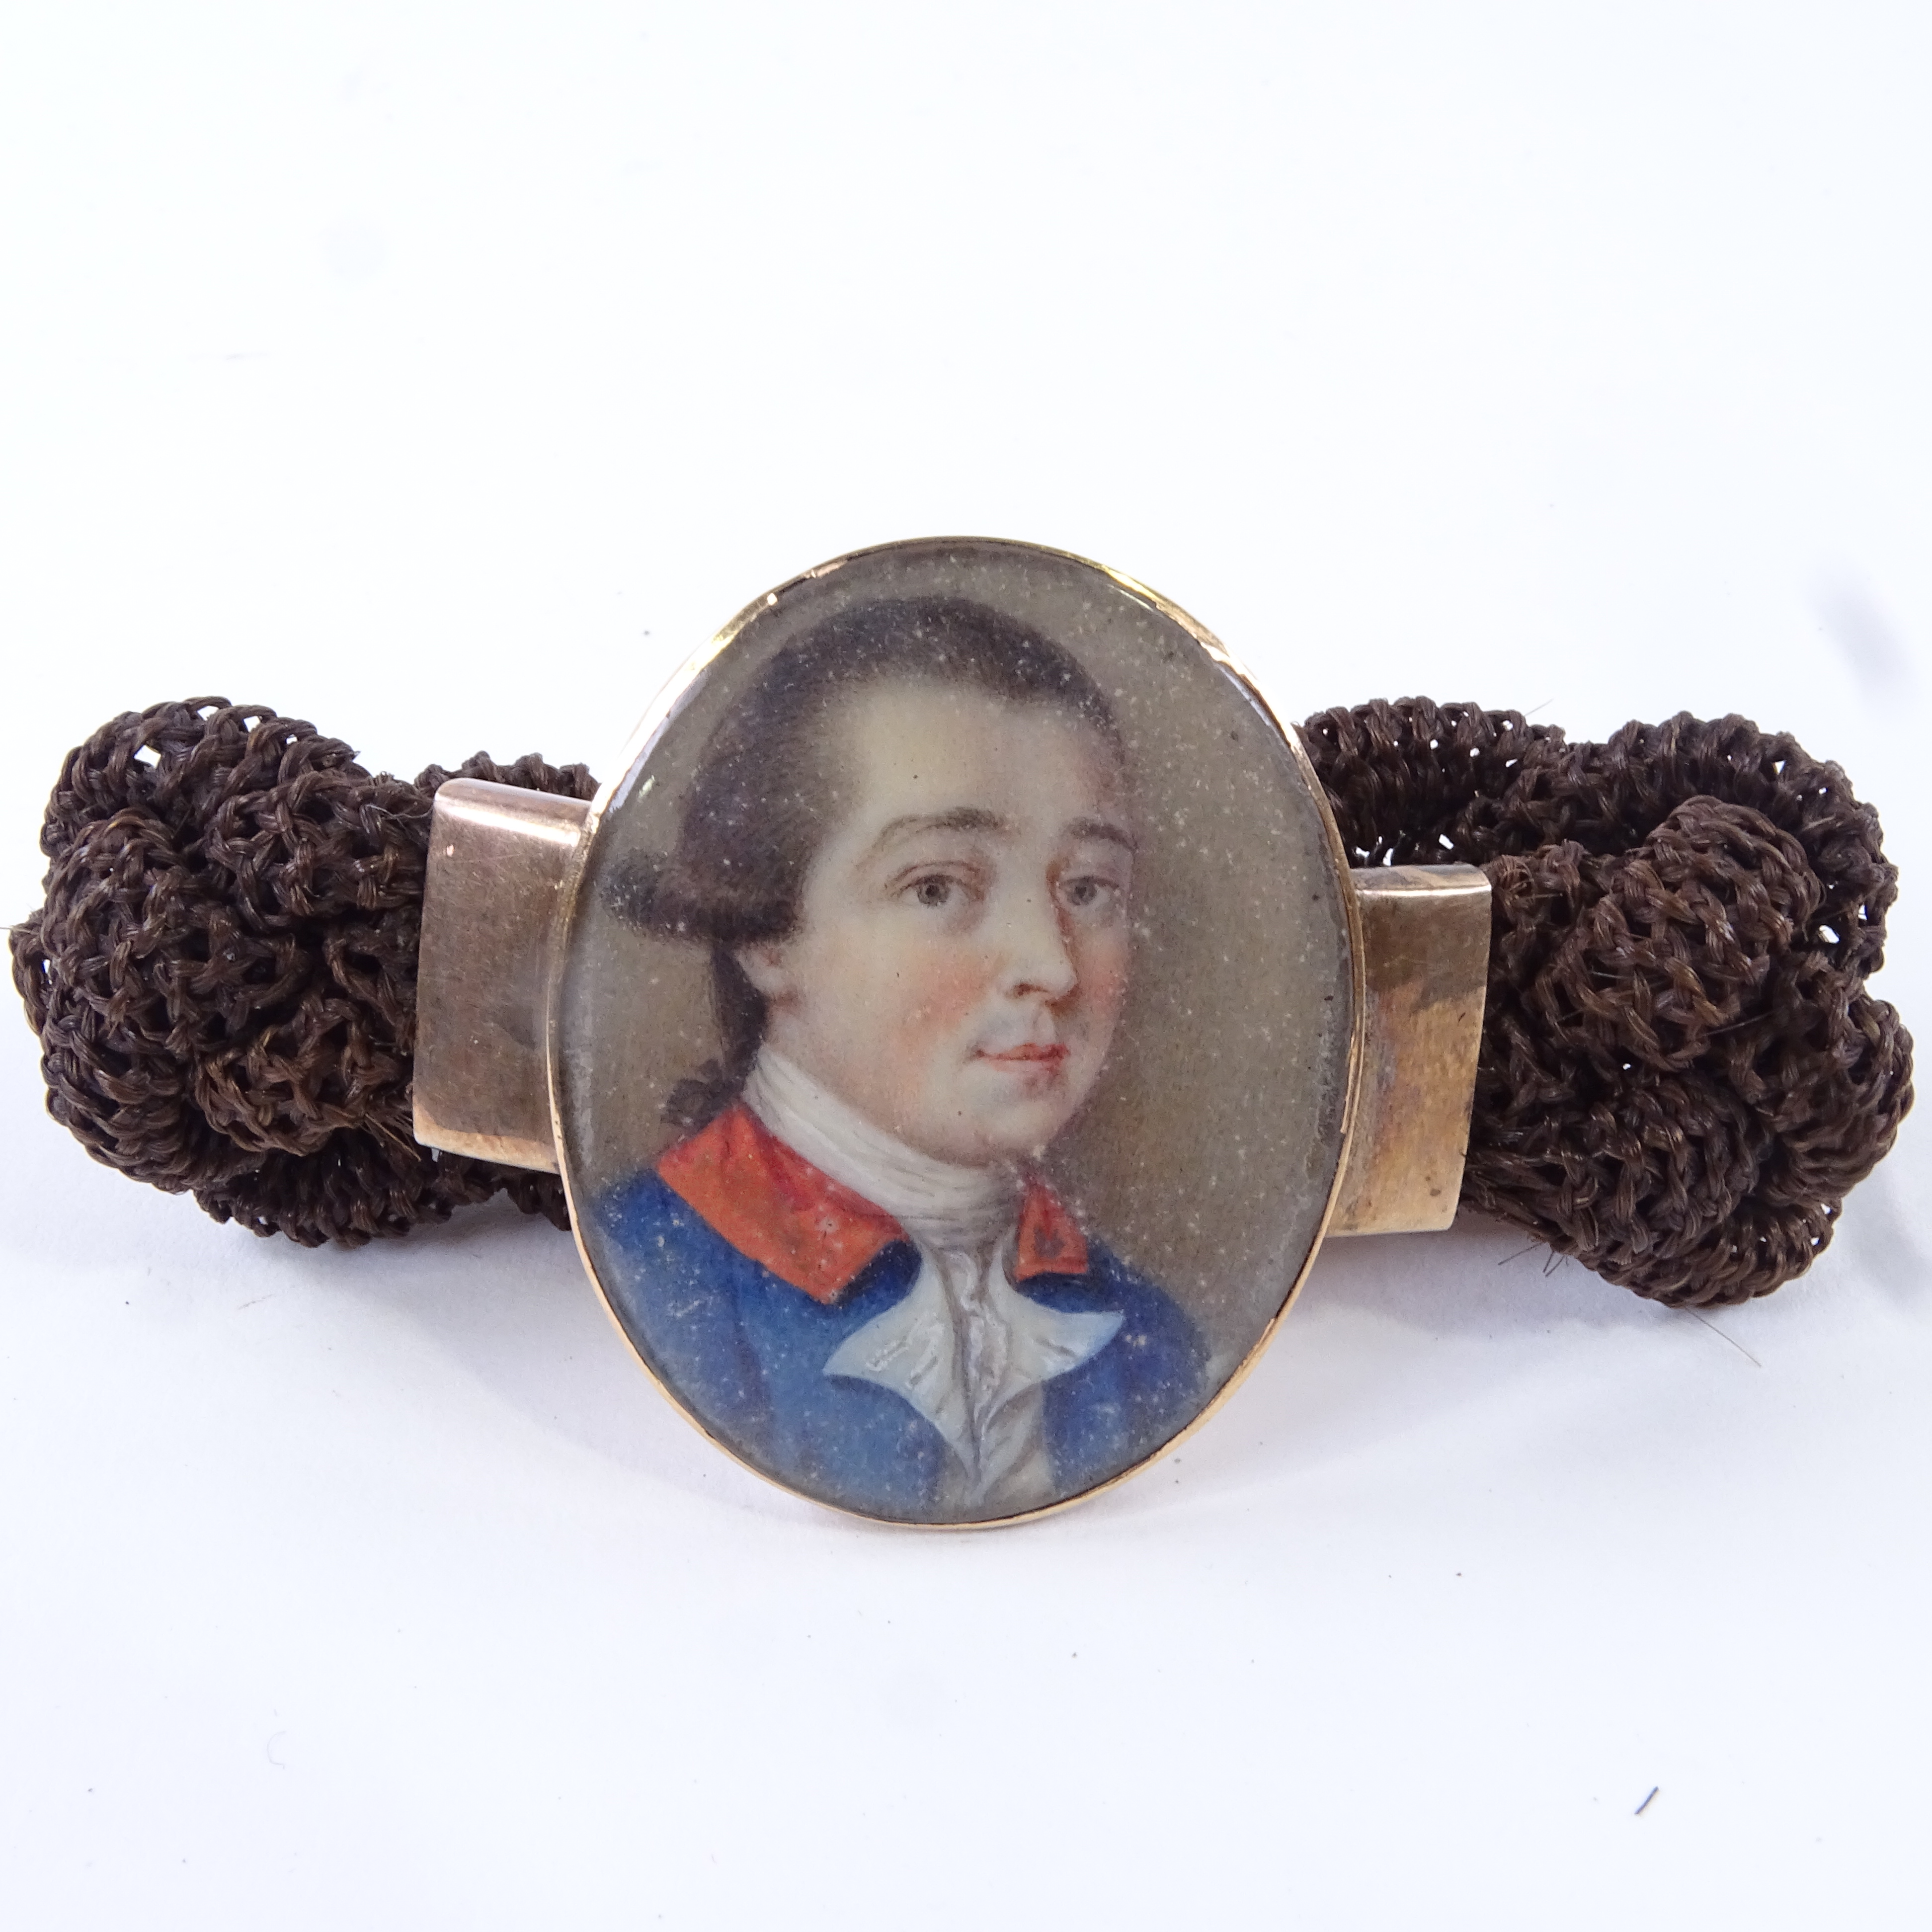 A Georgian woven hair bracelet with central miniature watercolour portrait on ivory, depicting a